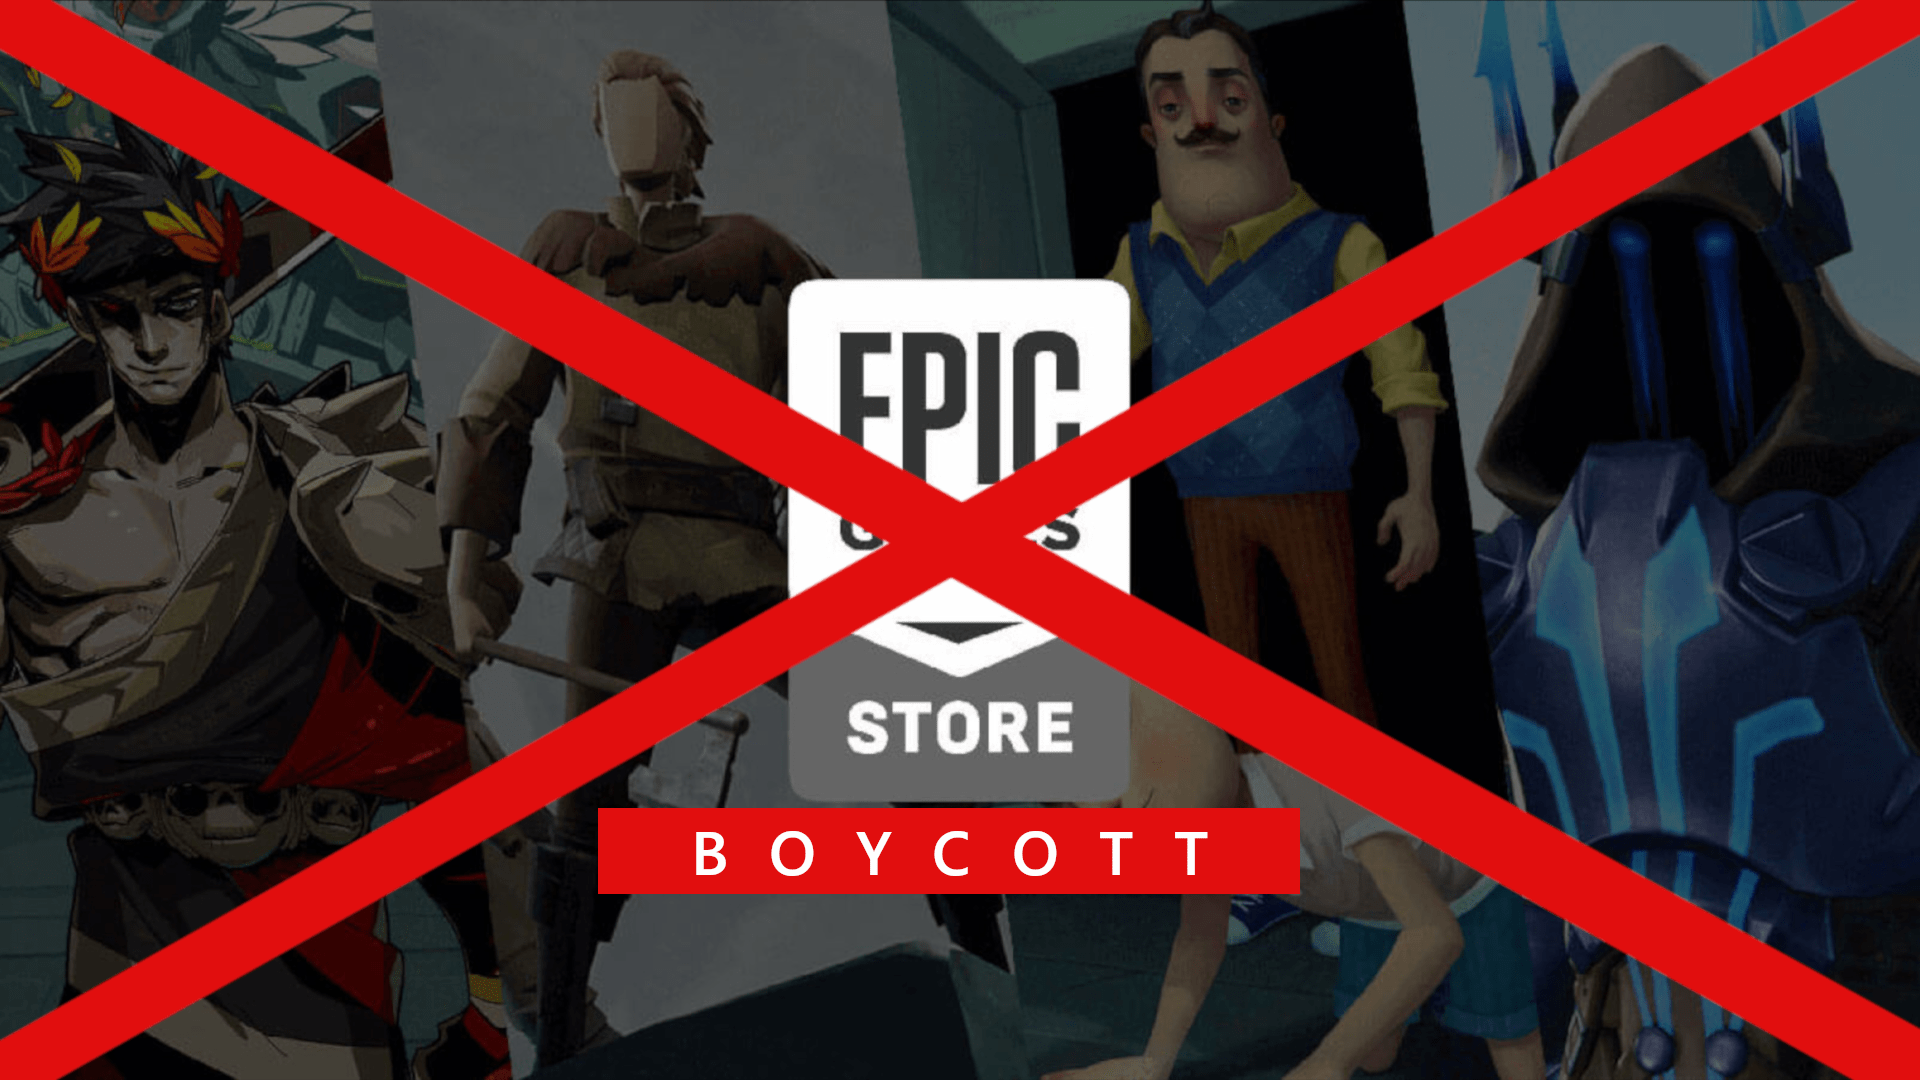 video game hills to die on - Gamers are unable to sustain a boycott